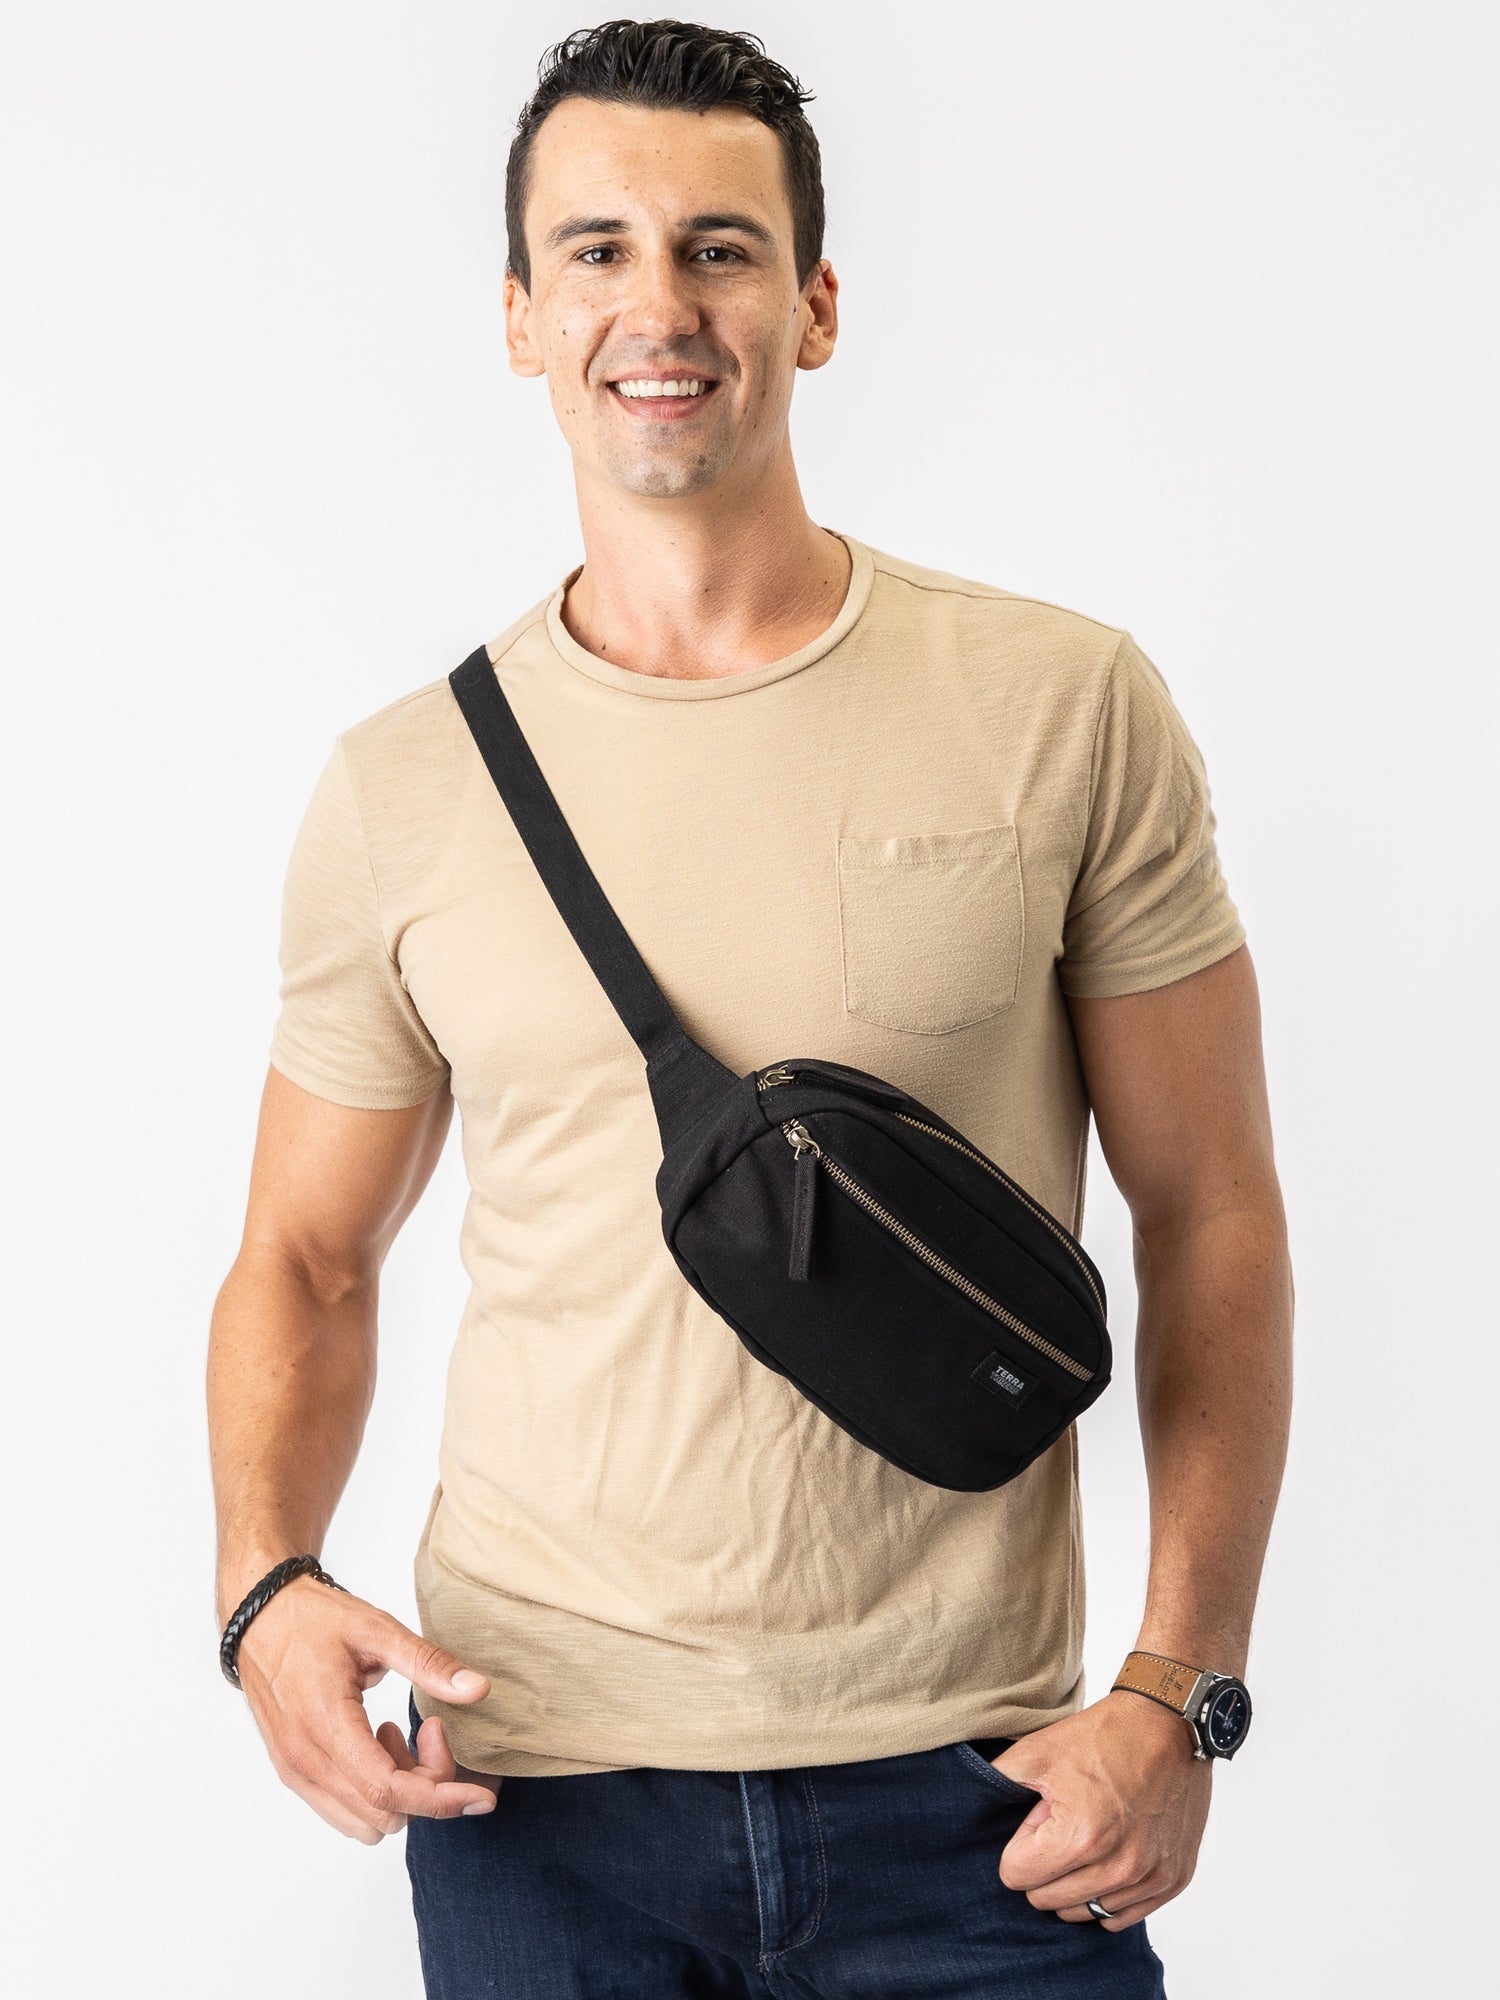 black fanny pack made of organic cotton